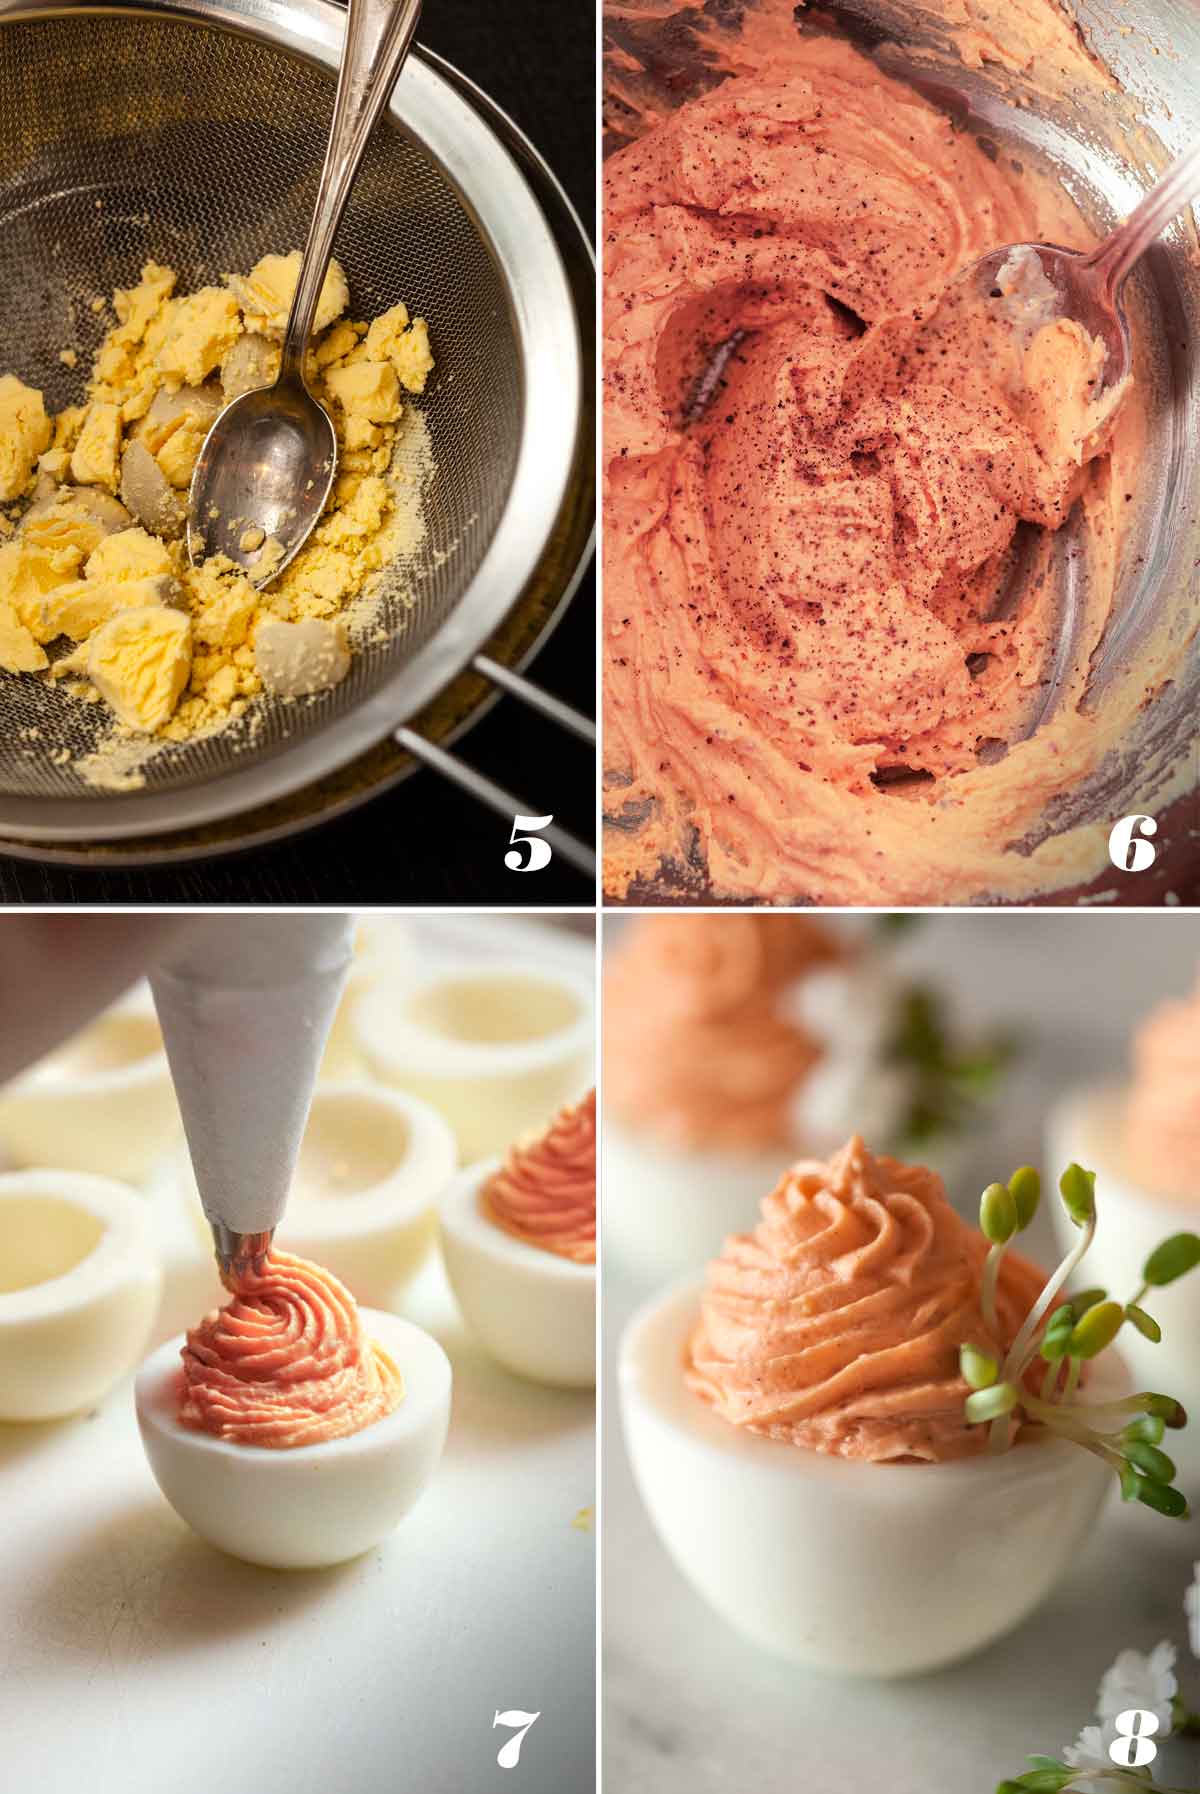 A collage of 4 numbered images showing how to make pink deviled eggs.